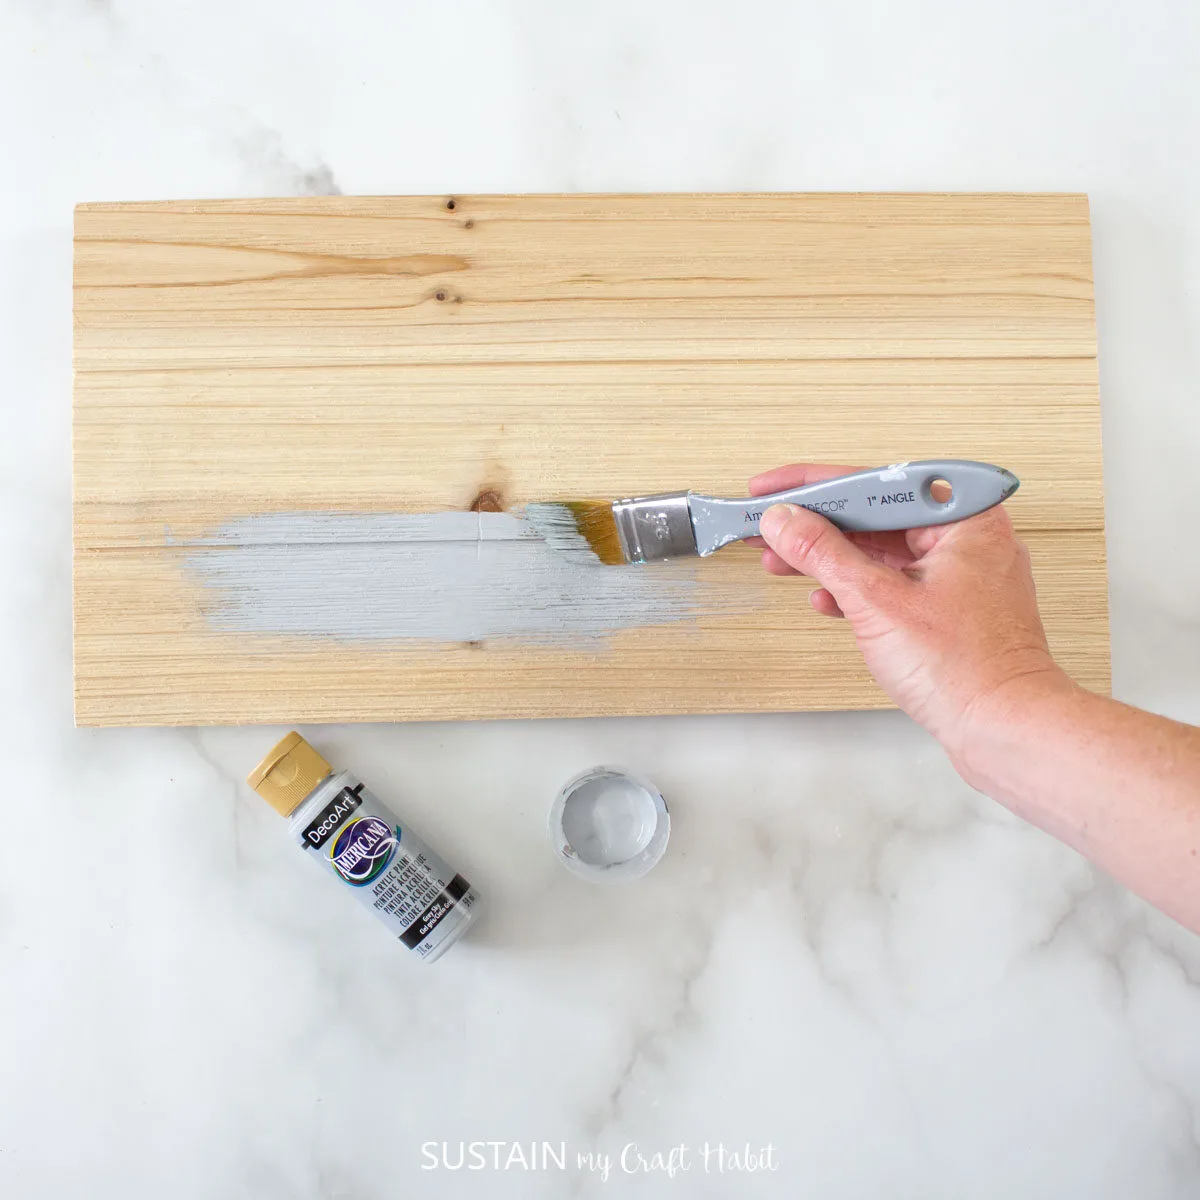 Painting the wooden pallet grey.